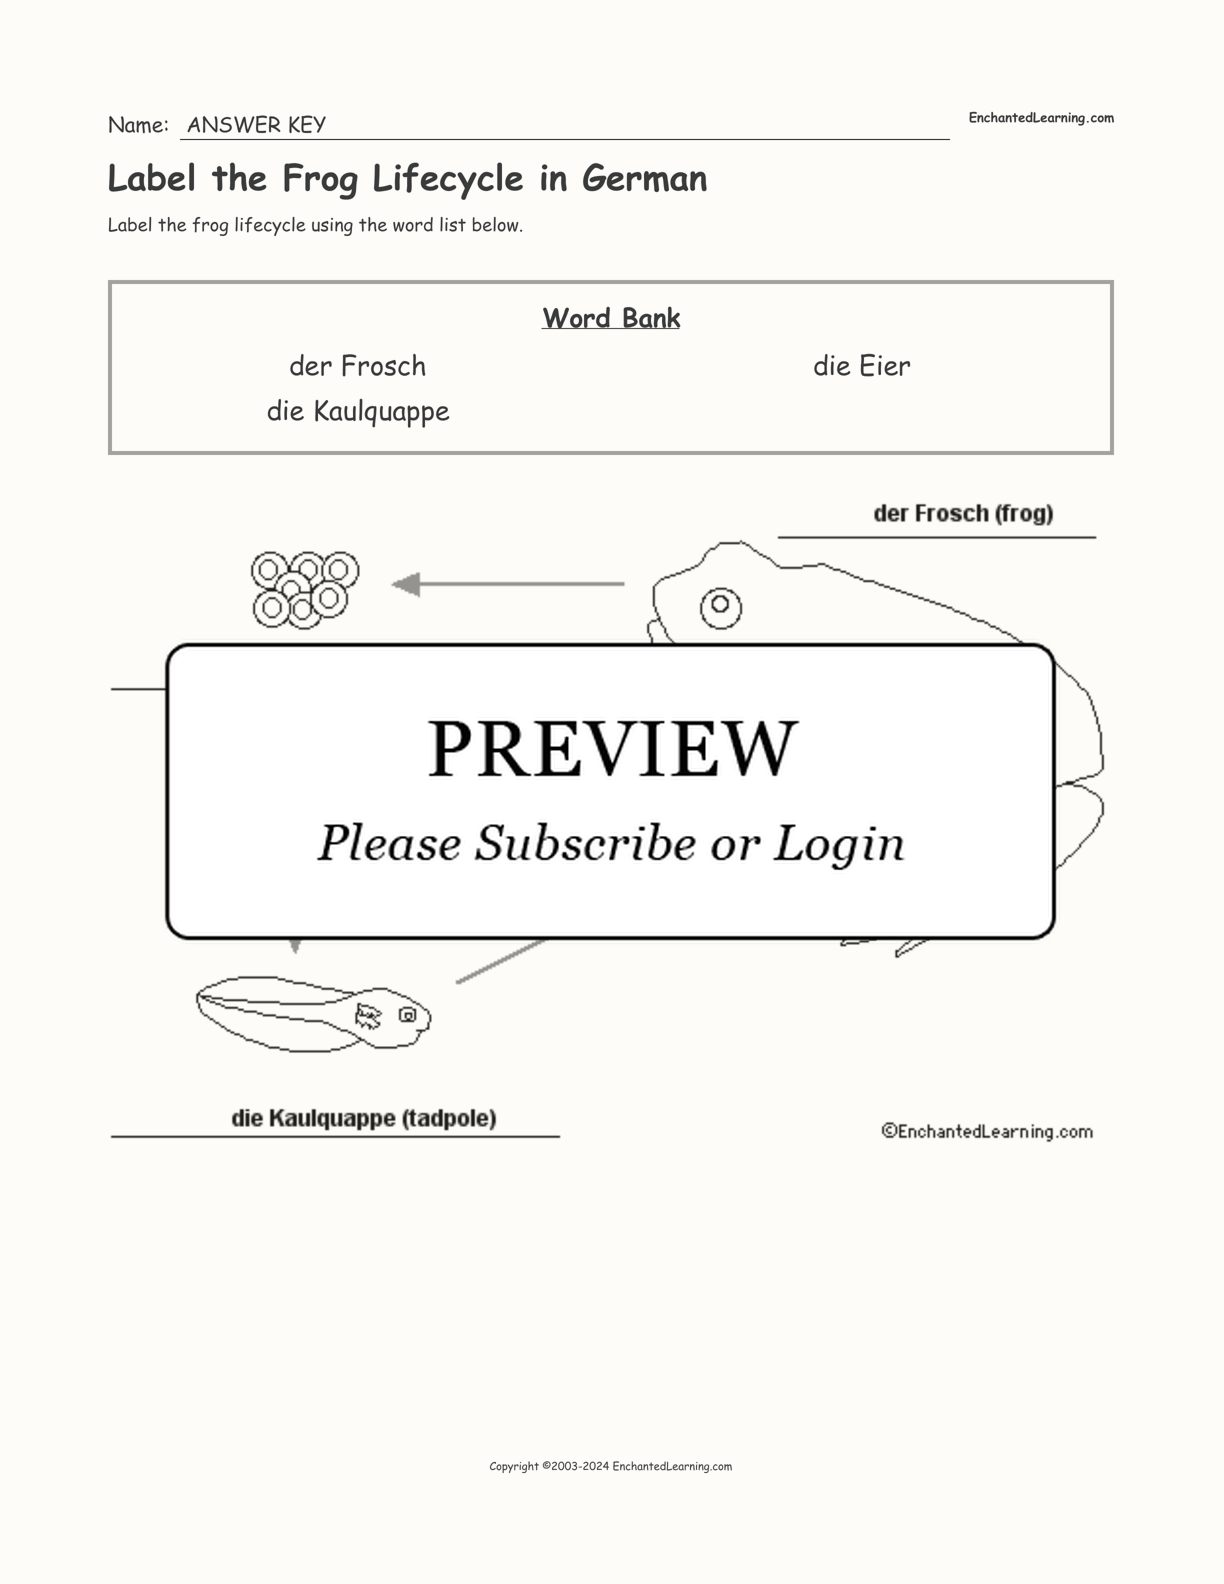 Label the Frog Lifecycle in German interactive worksheet page 2